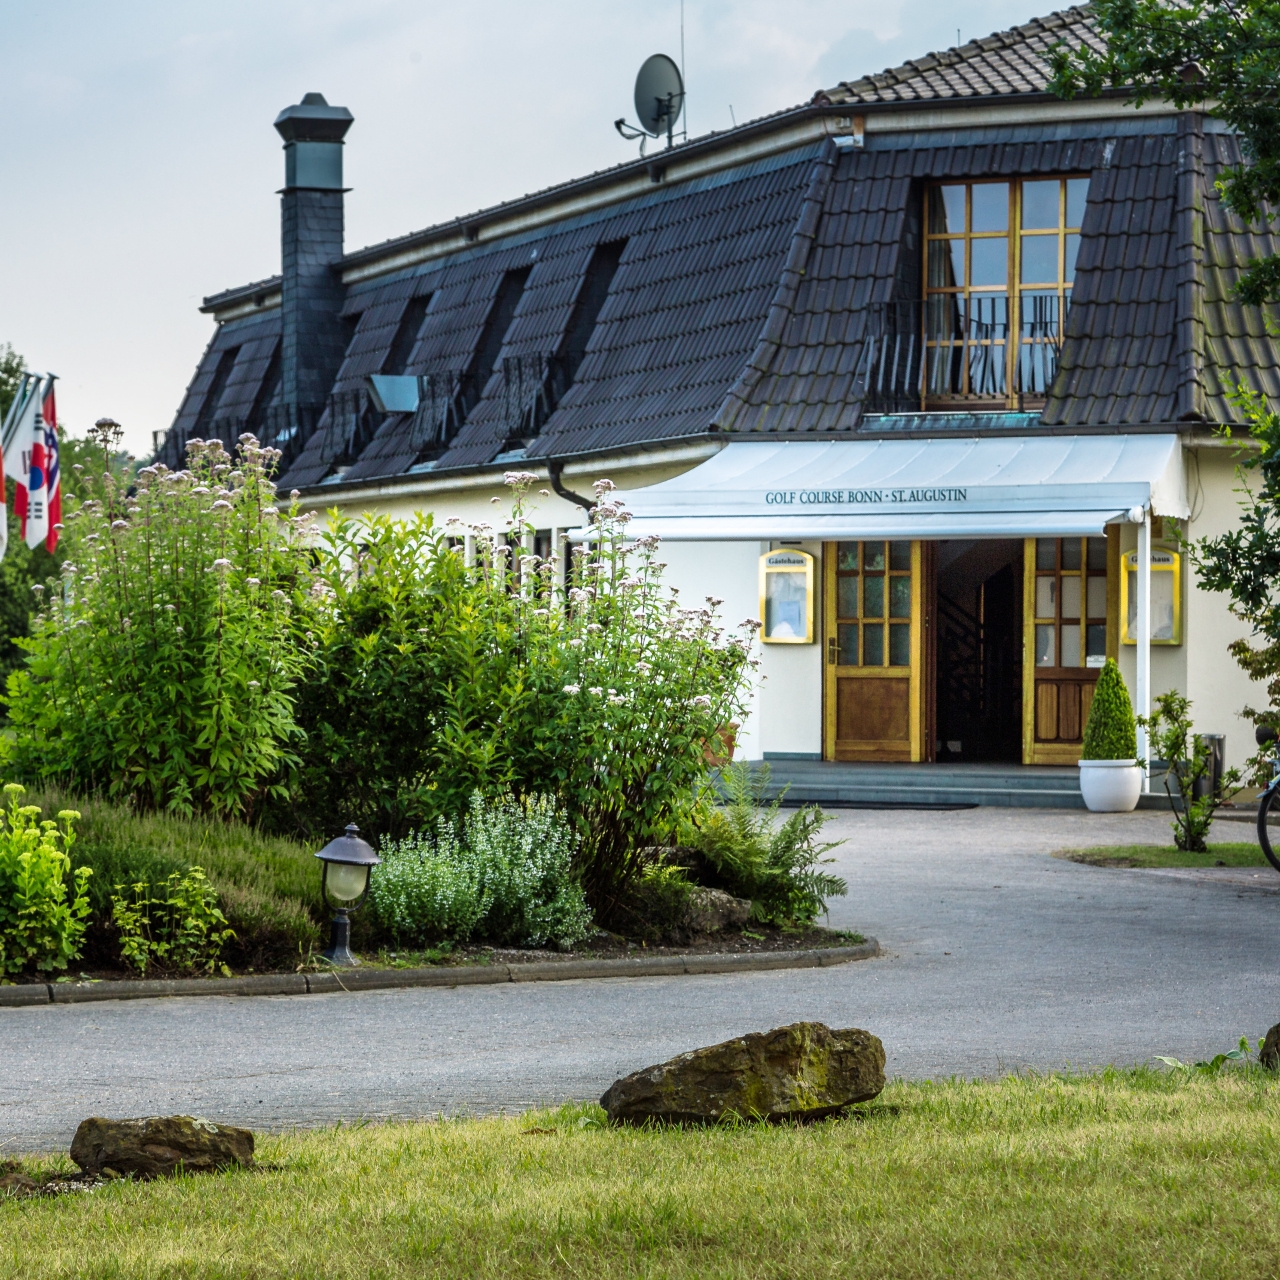 Hotel Golf Course Bonn North Rhine-Westphalia at HRS with free services